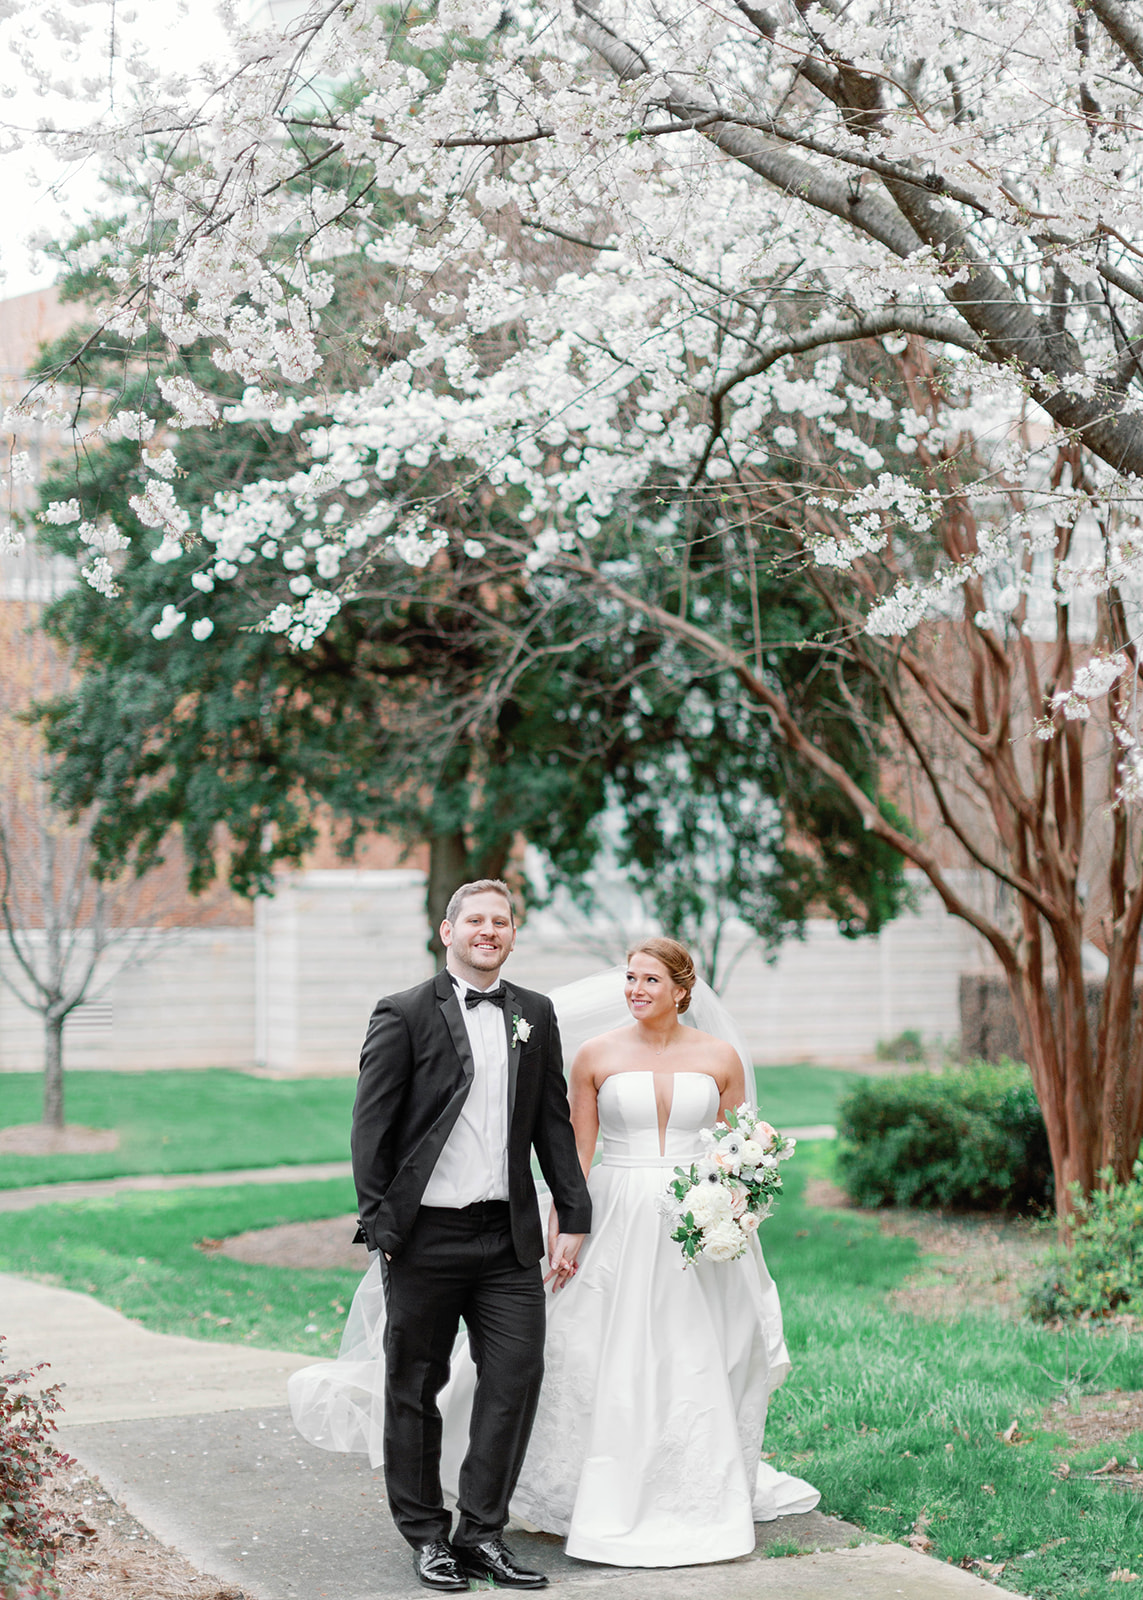 Bride + Groom wed in Charlotte at the Ruth Charlotte